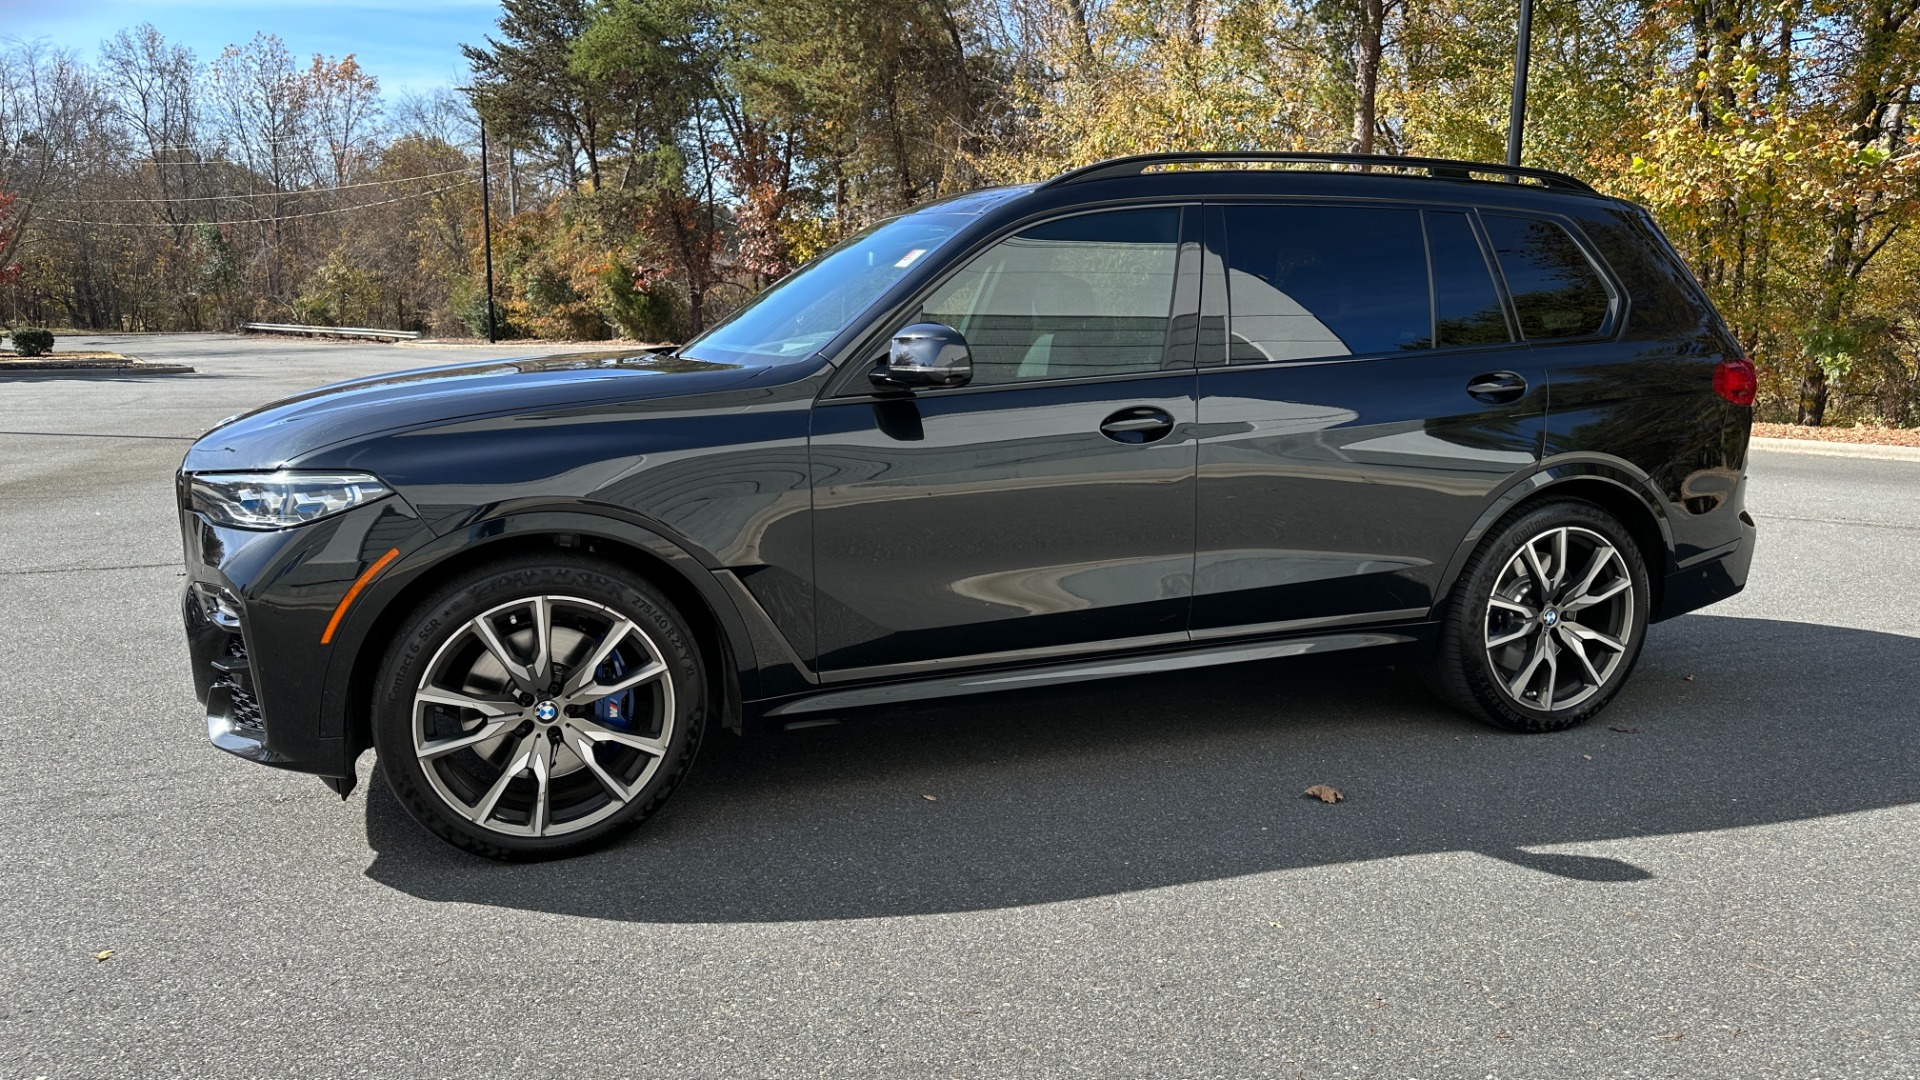 Used 2020 BMW X7 M50i / LOADED / DYNAMIC HANDLING PKG / EXECUTIVE / LUXURY SEATING PKG / MOR for sale $57,995 at Formula Imports in Charlotte NC 28227 8